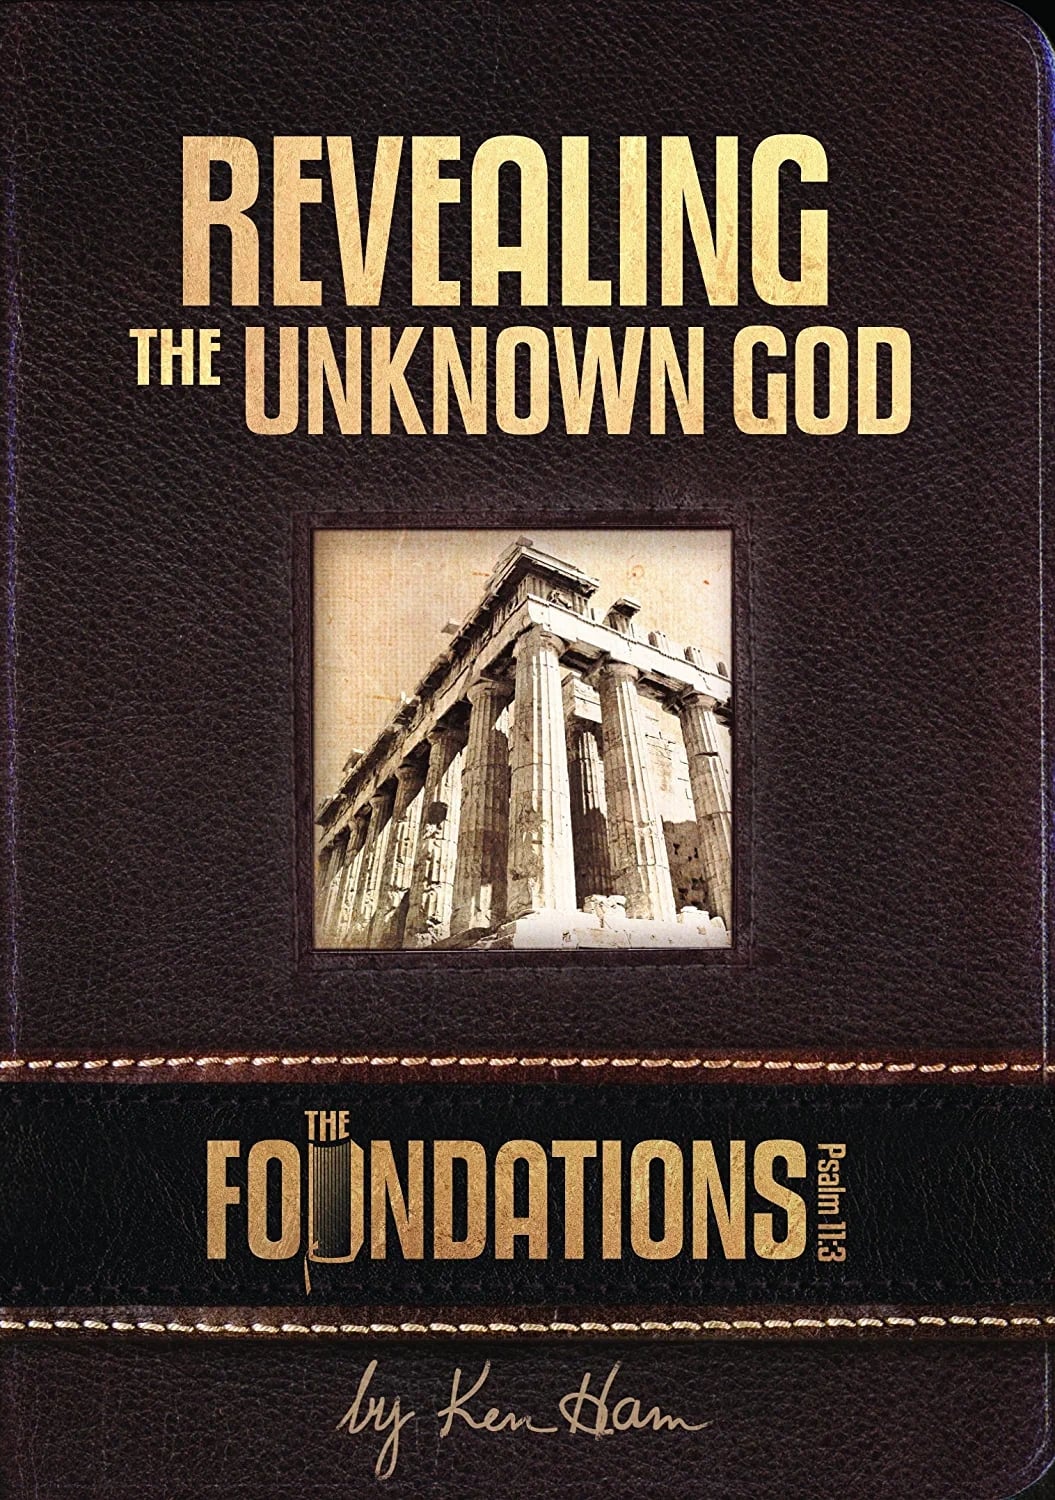 Ken Ham’s Foundations - Revealing the Unknown God